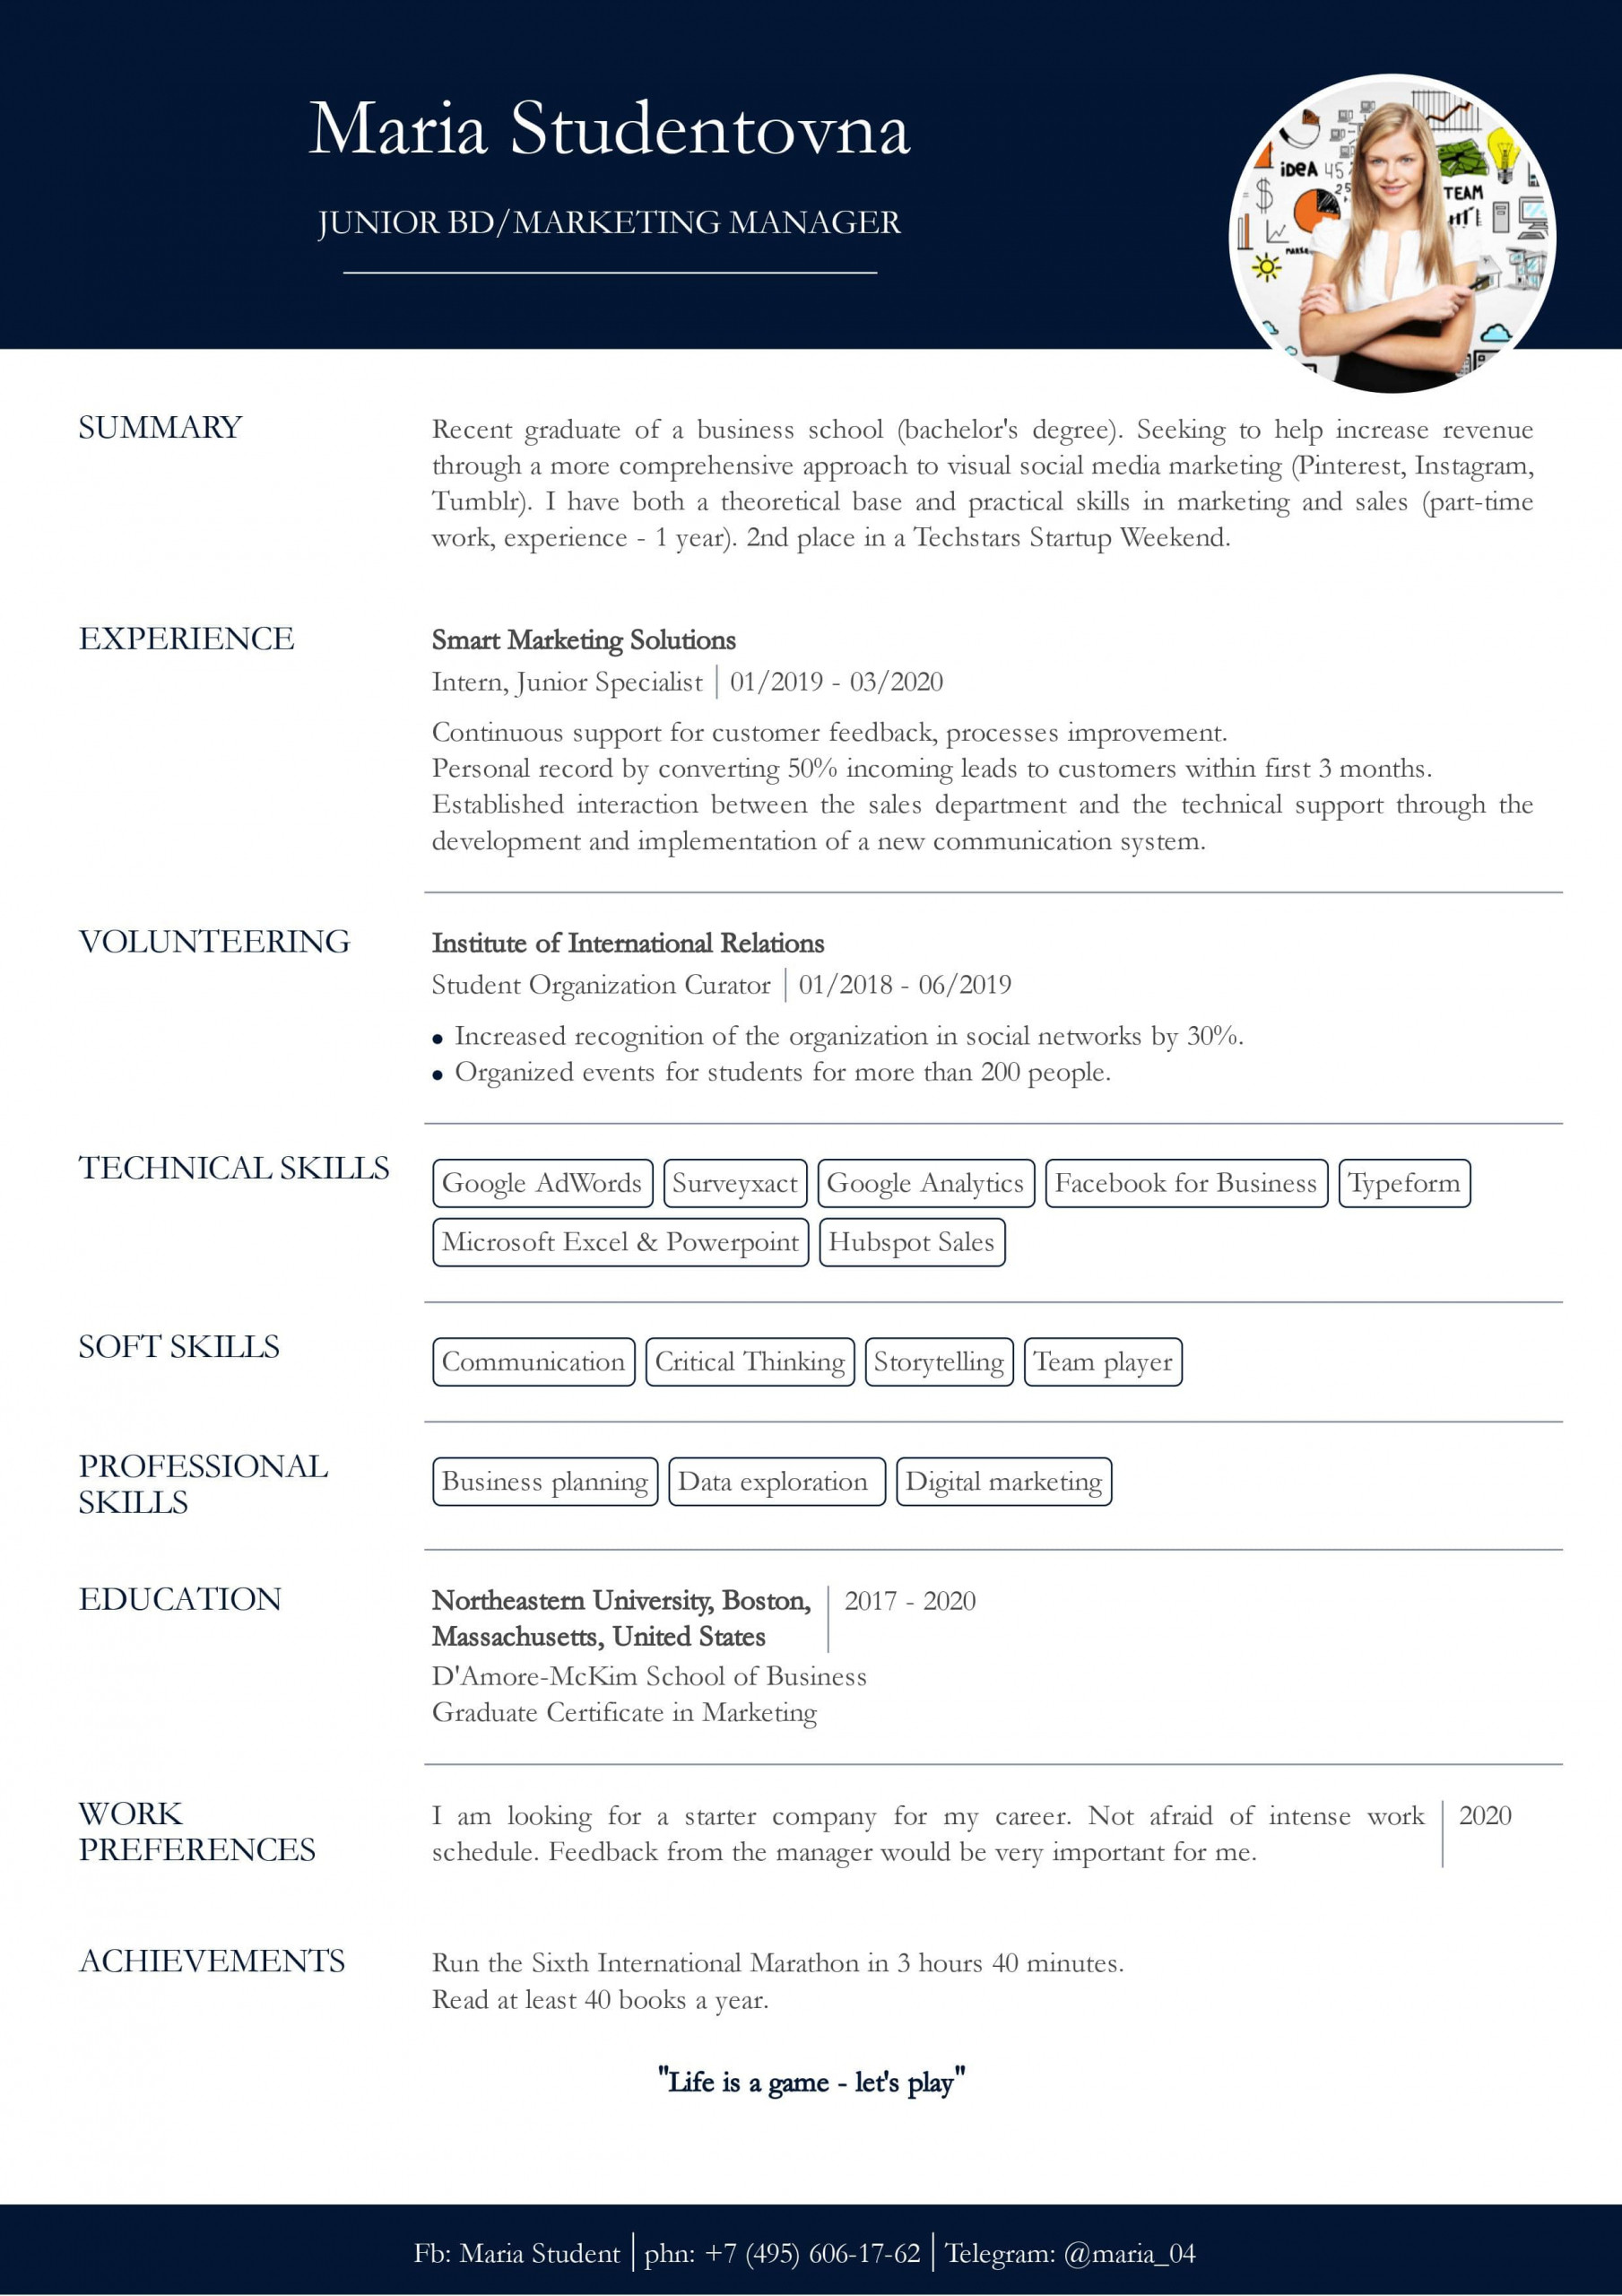 Resume Template for People with No Work Experience Resume with No Work Experience. Sample for Students. – Cv2you Blog